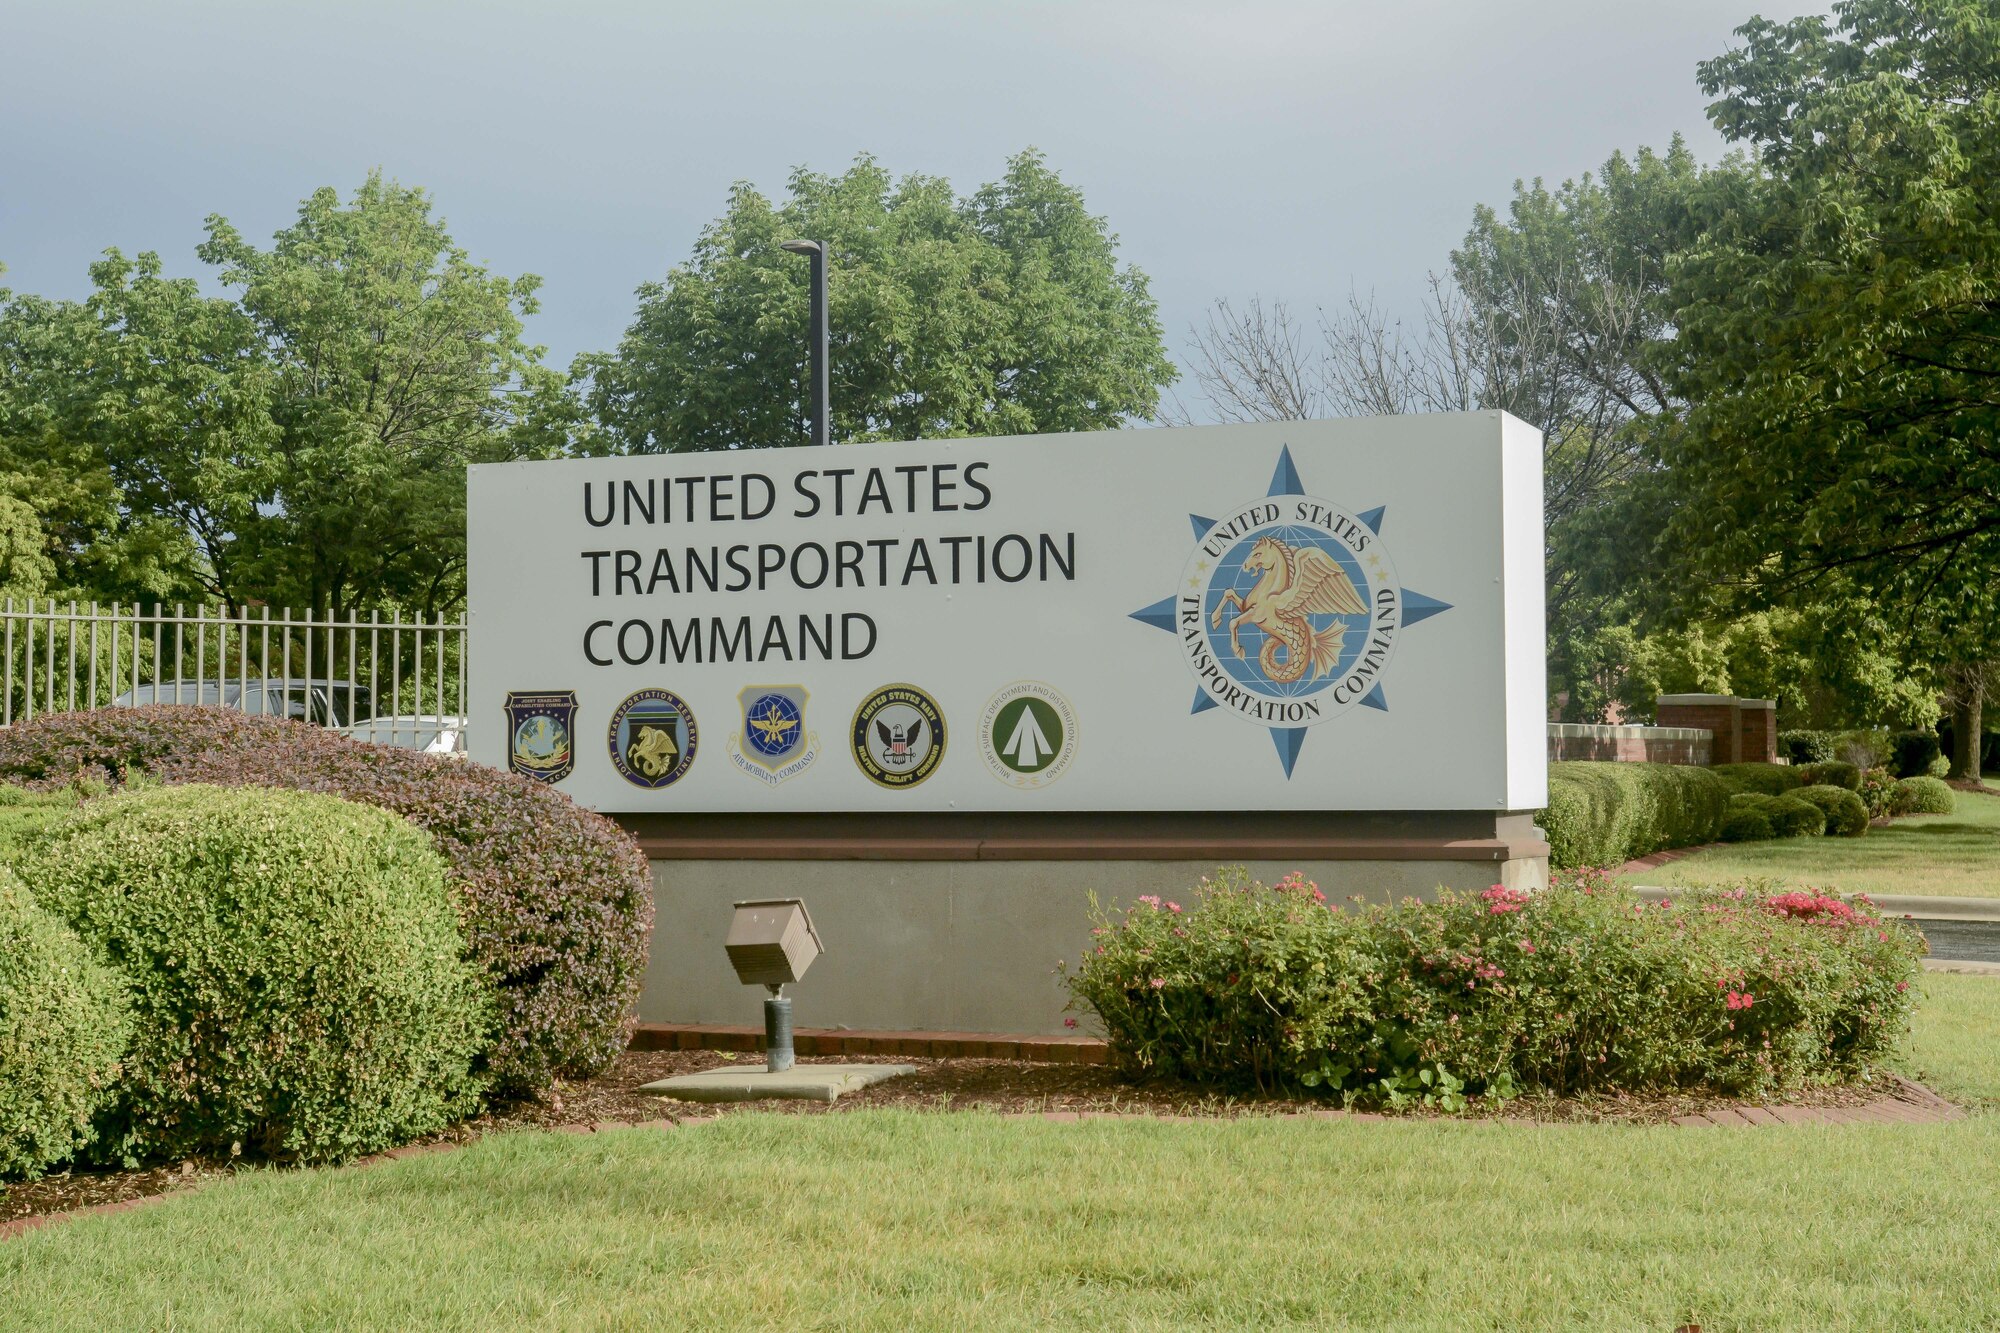 This episode of Beyond the Beltway takes a look at U.S. Transportation Command and its worldwide logistics mission